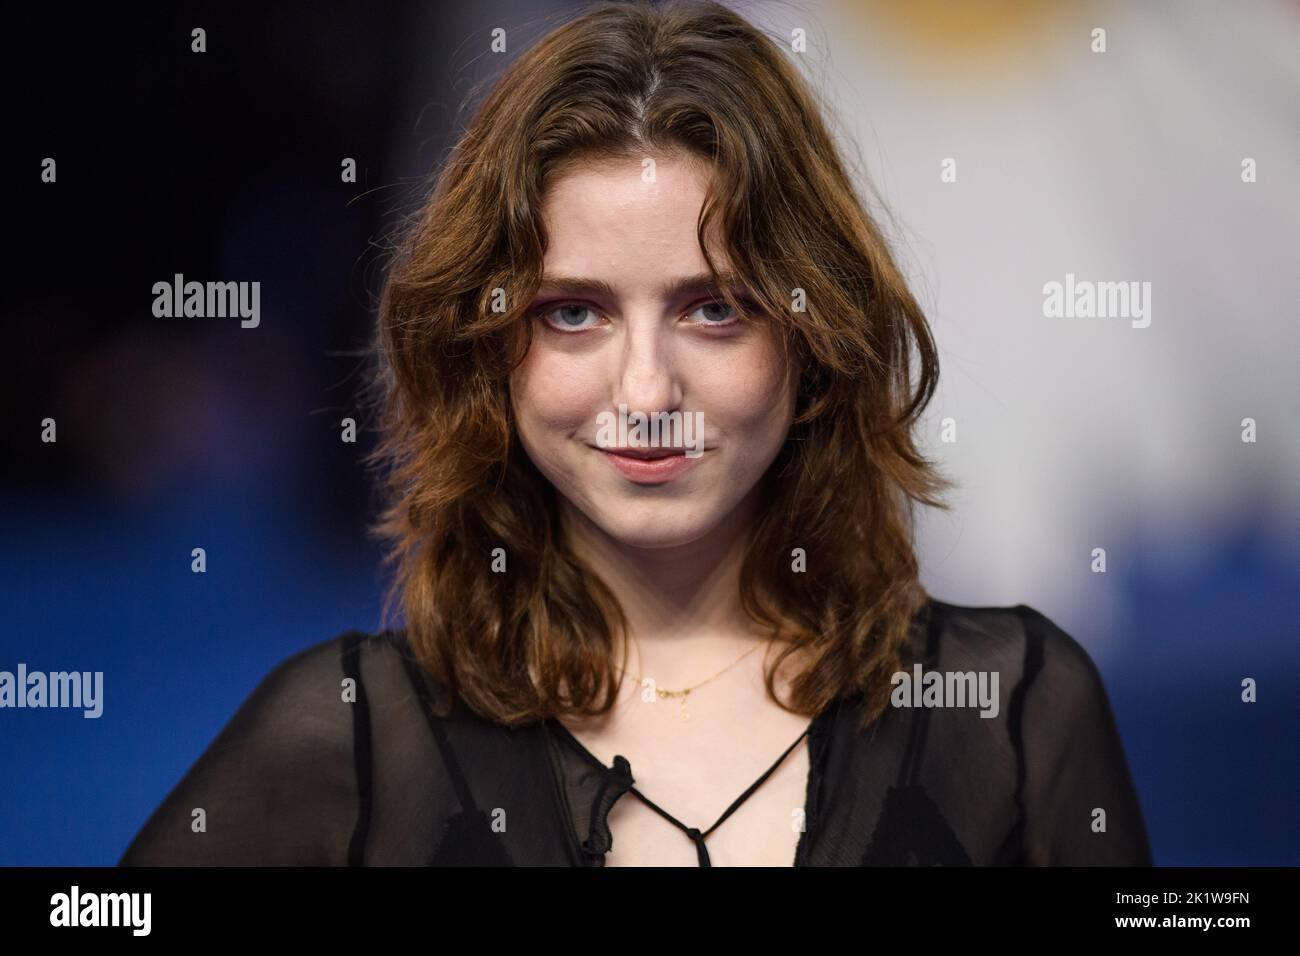 London, UK. 20 September 2022. Birdy attending the UK premiere of Catherine Called Birdy at the Curzon Mayfair cinema, London . Picture date: Tuesday September 20, 2022. Photo credit should read: Matt Crossick/Empics/Alamy Live News Stock Photo